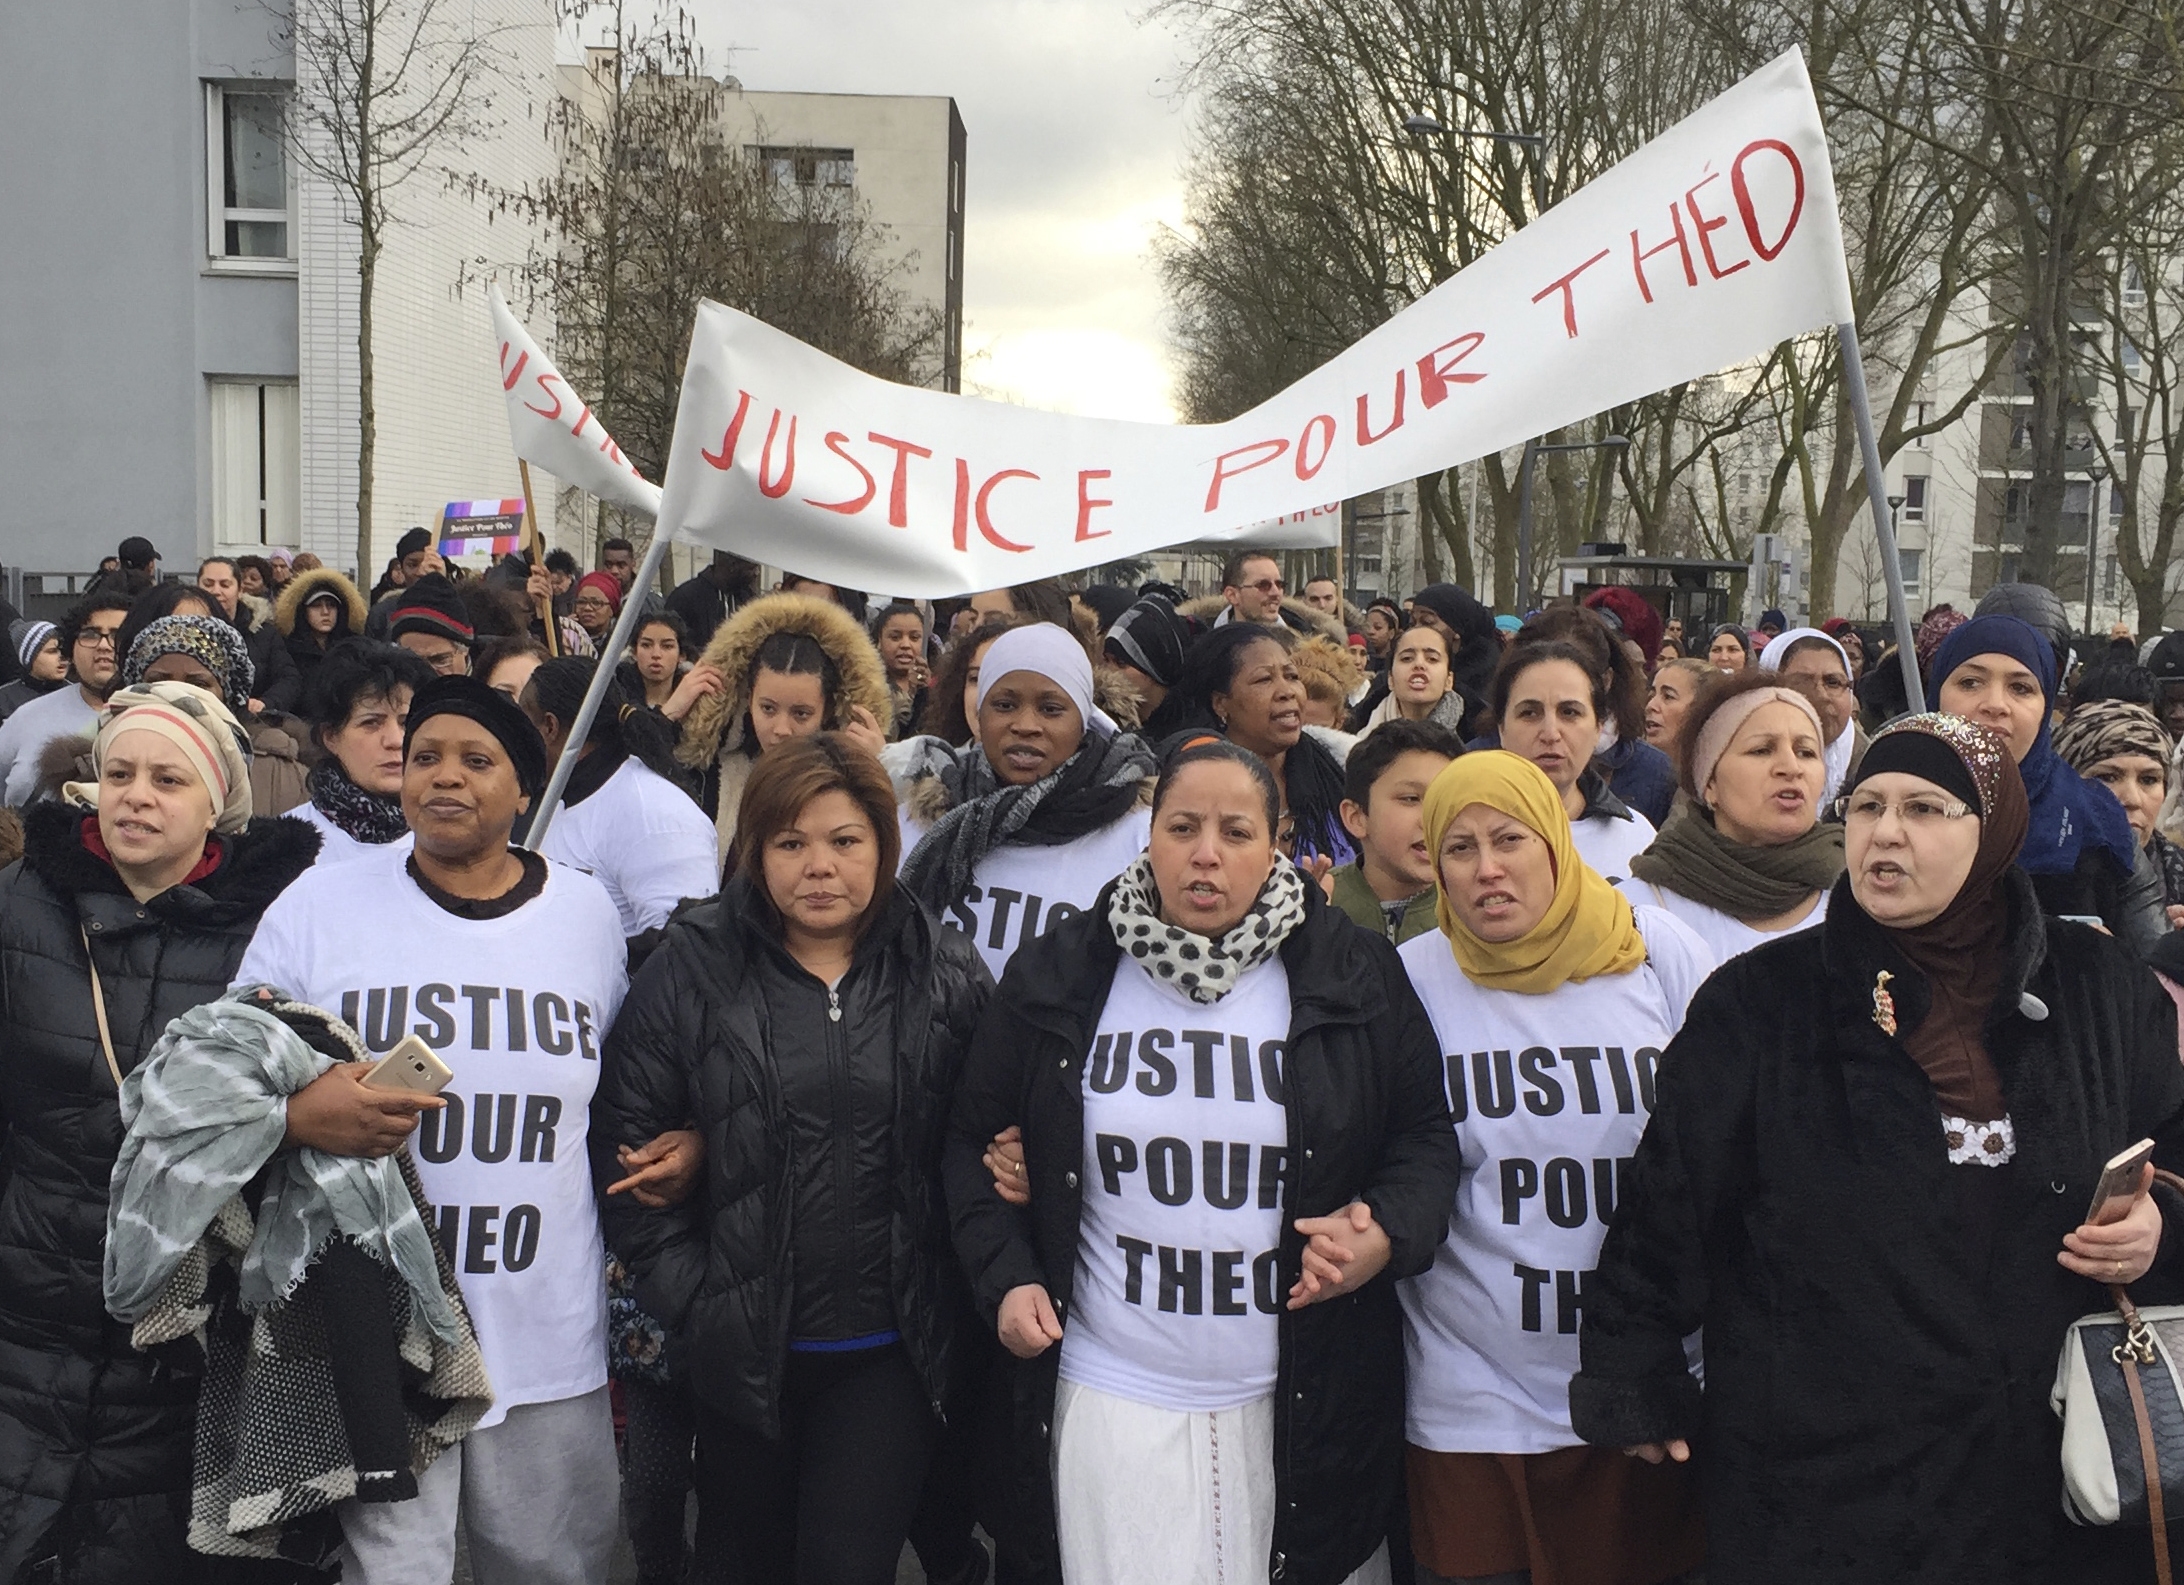 People march in the streets of Aulnay-sous-Bois, north of Paris, France, holding a sign reading "Justice for Theo" during a protest, a day after a French police officer was charged with the rape of a youth, Monday, Feb. 6, 2017. One French police officer has been charged with raping a 22-year-old man and three others have been charged with assault after an identity check degenerated last week in the Paris suburb of Aulnay-sous-Bois. (AP Photo/Milos Krivokapic)